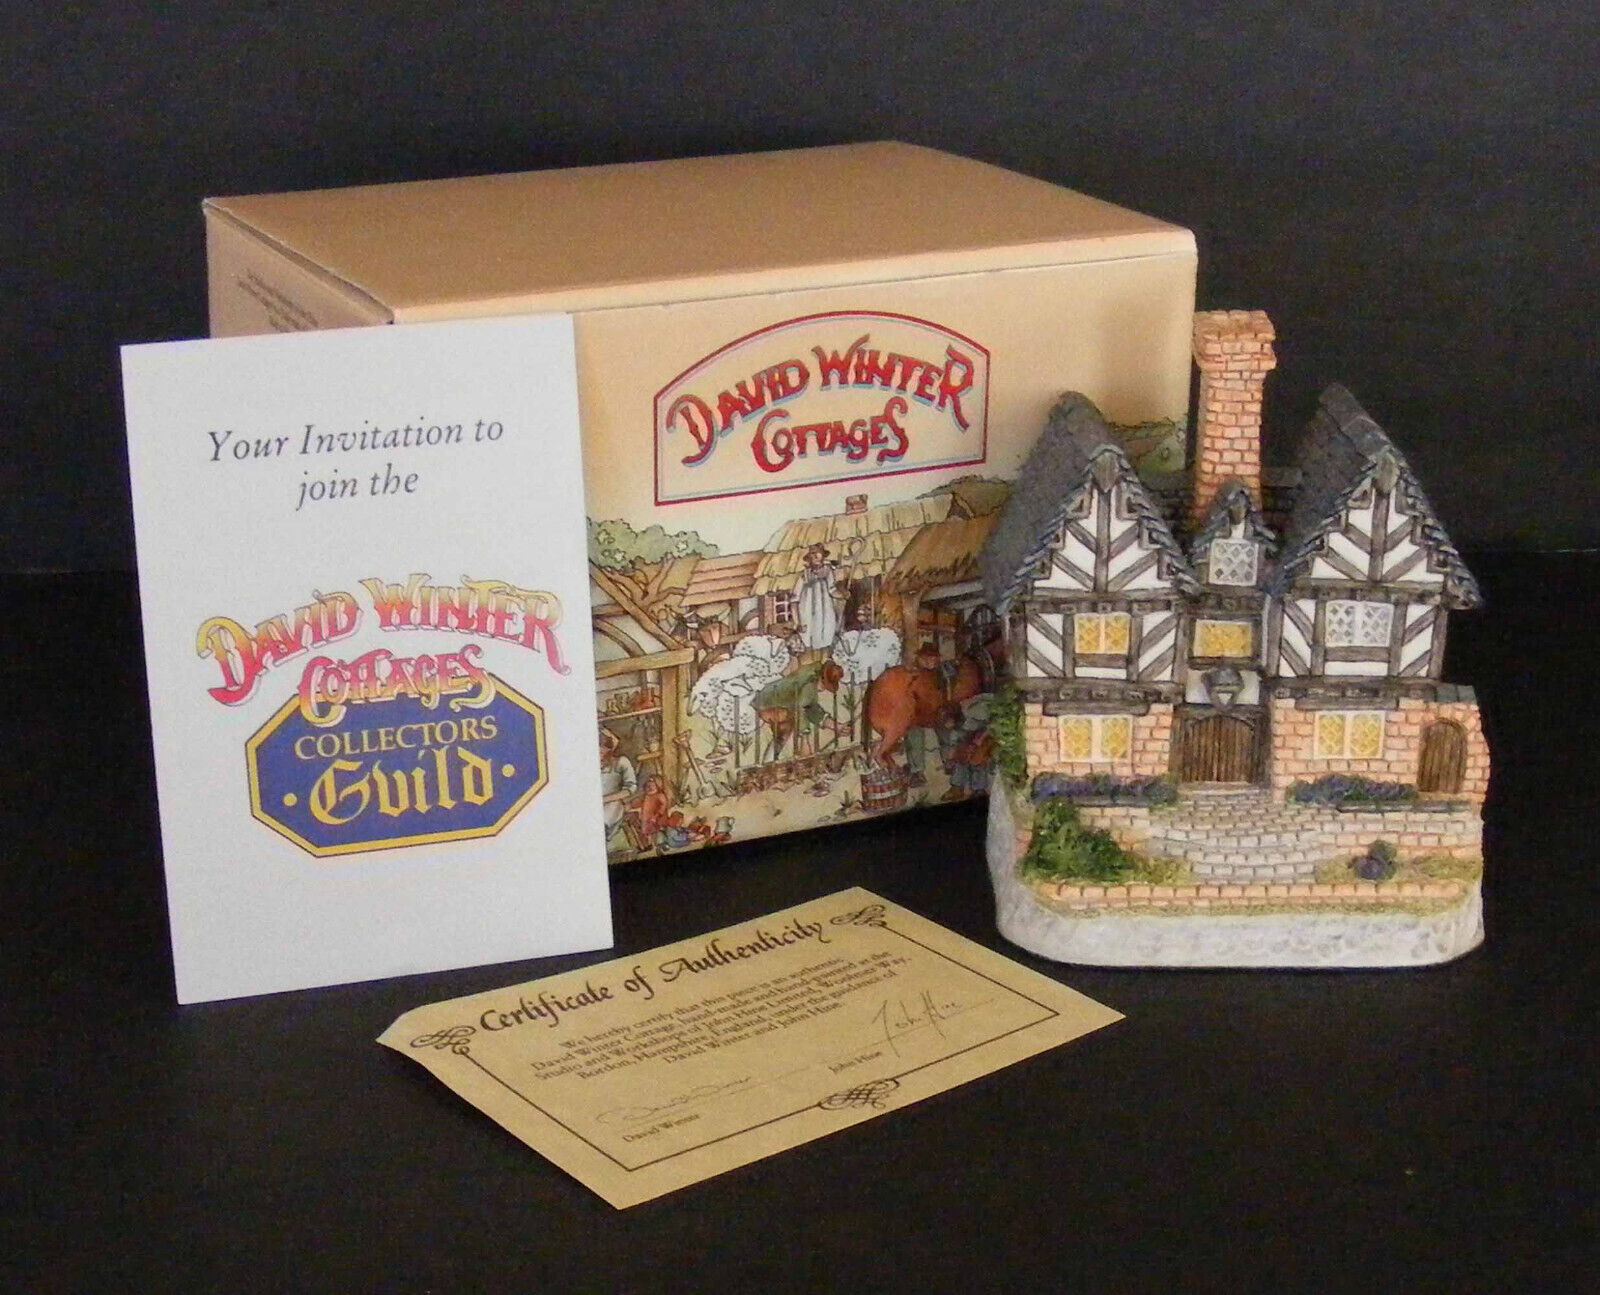 THE CONSTABULARY - a David Winter Cottage The English Village Collection © 1993 - $35.00